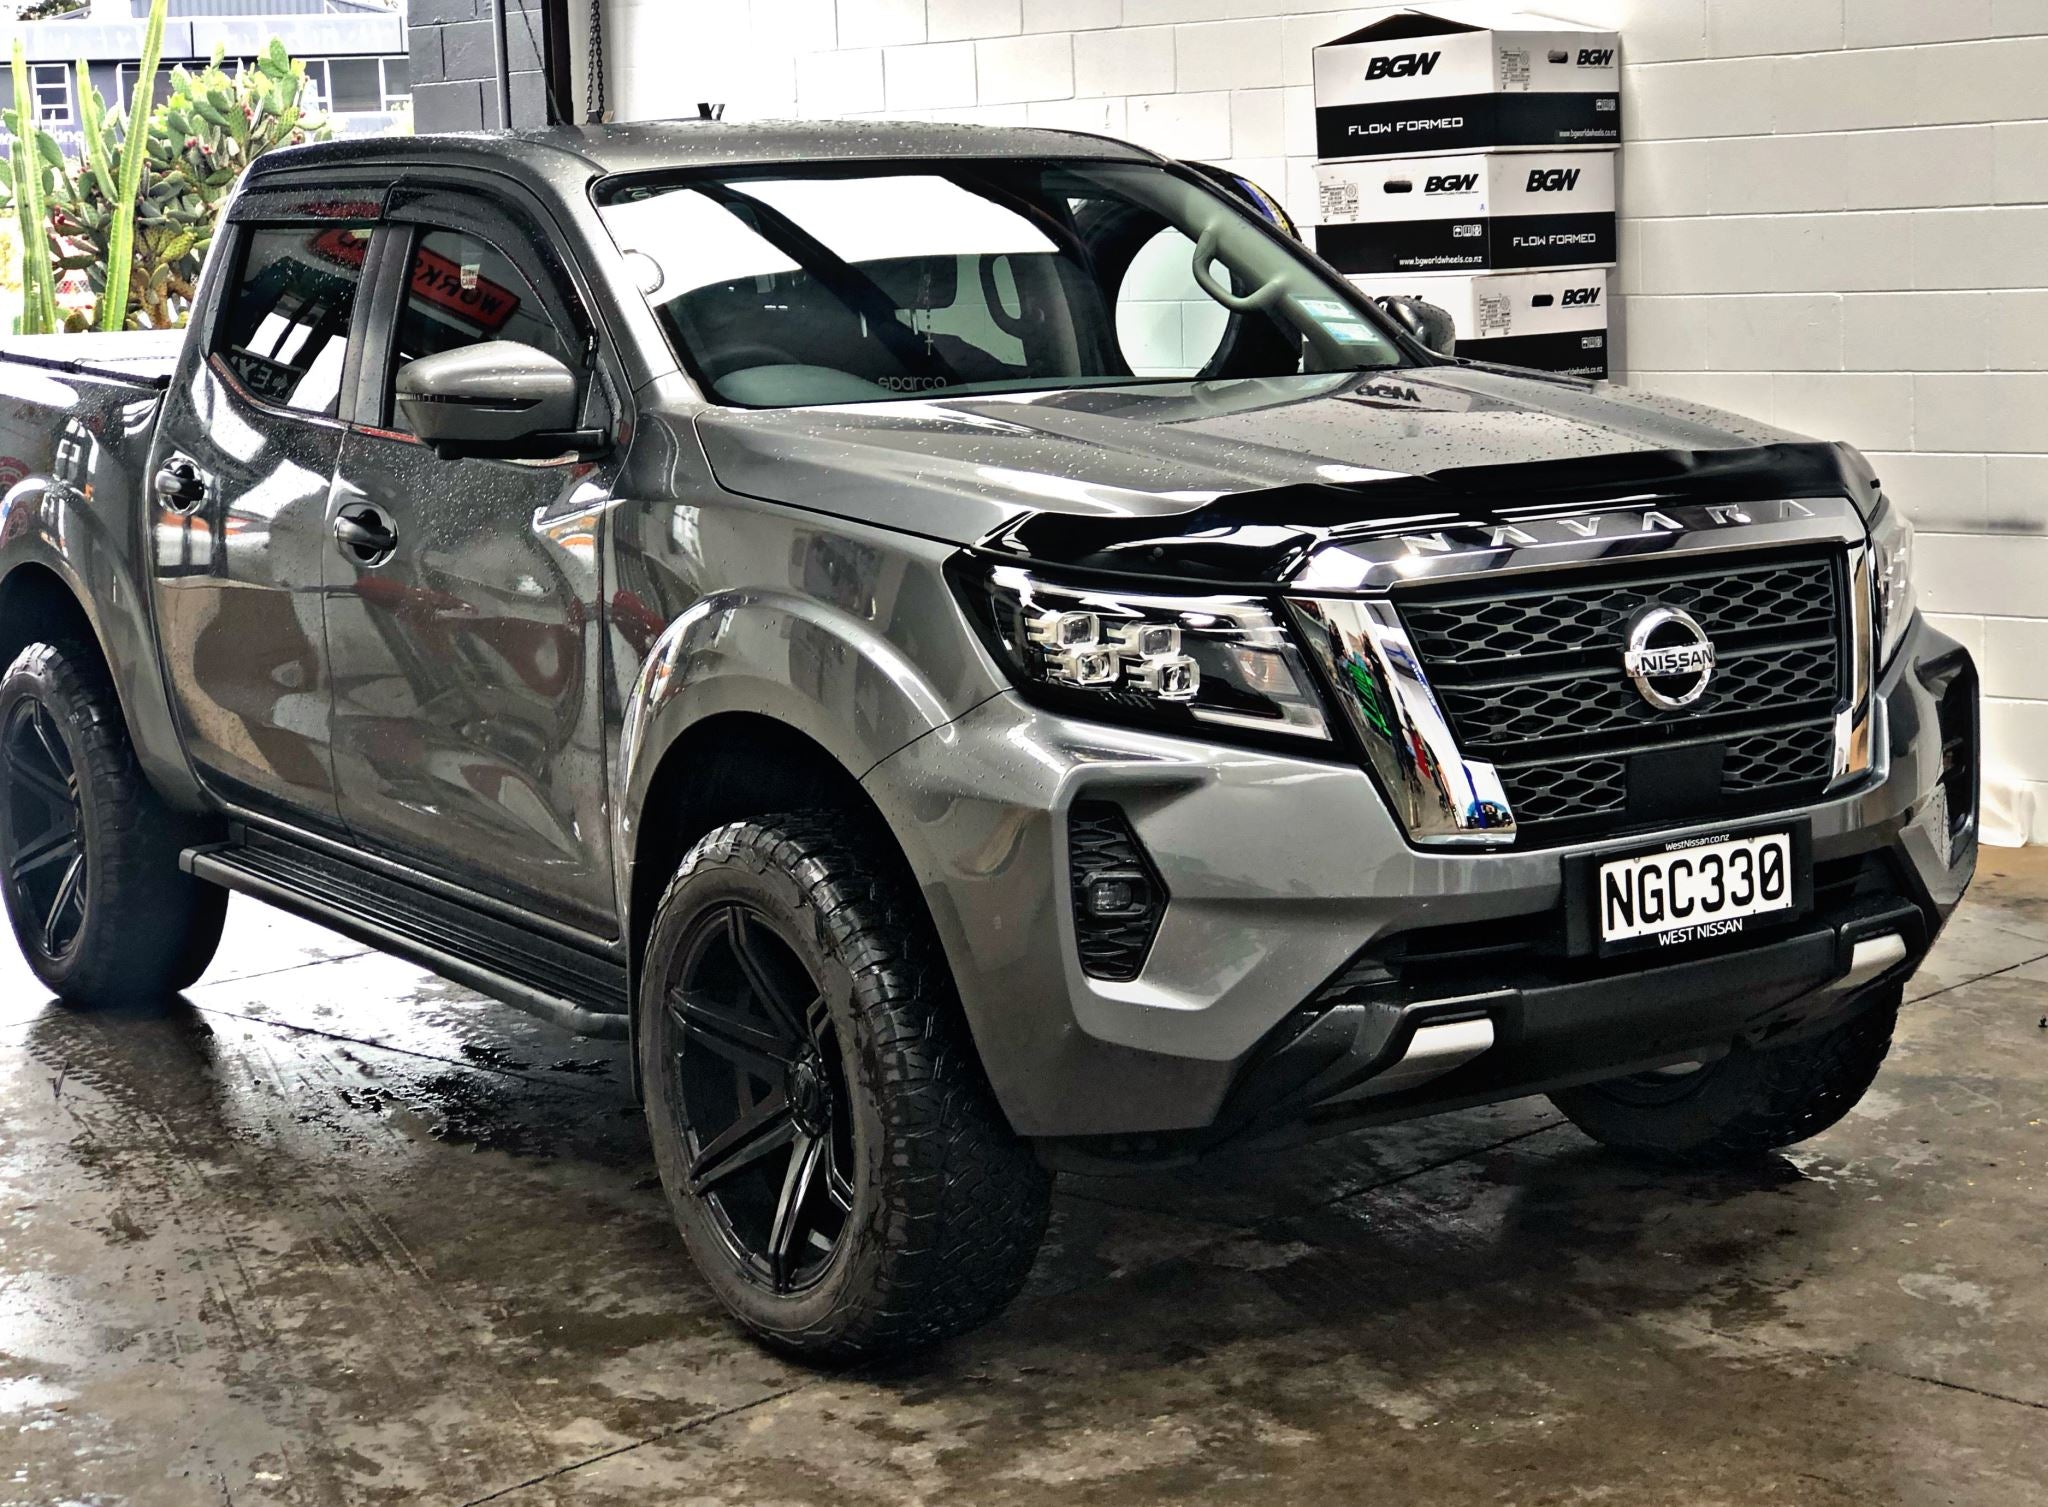 BONNET GUARD - NISSAN NAVARA NP300 2021+ installed on silver Ute corner view zoomed out